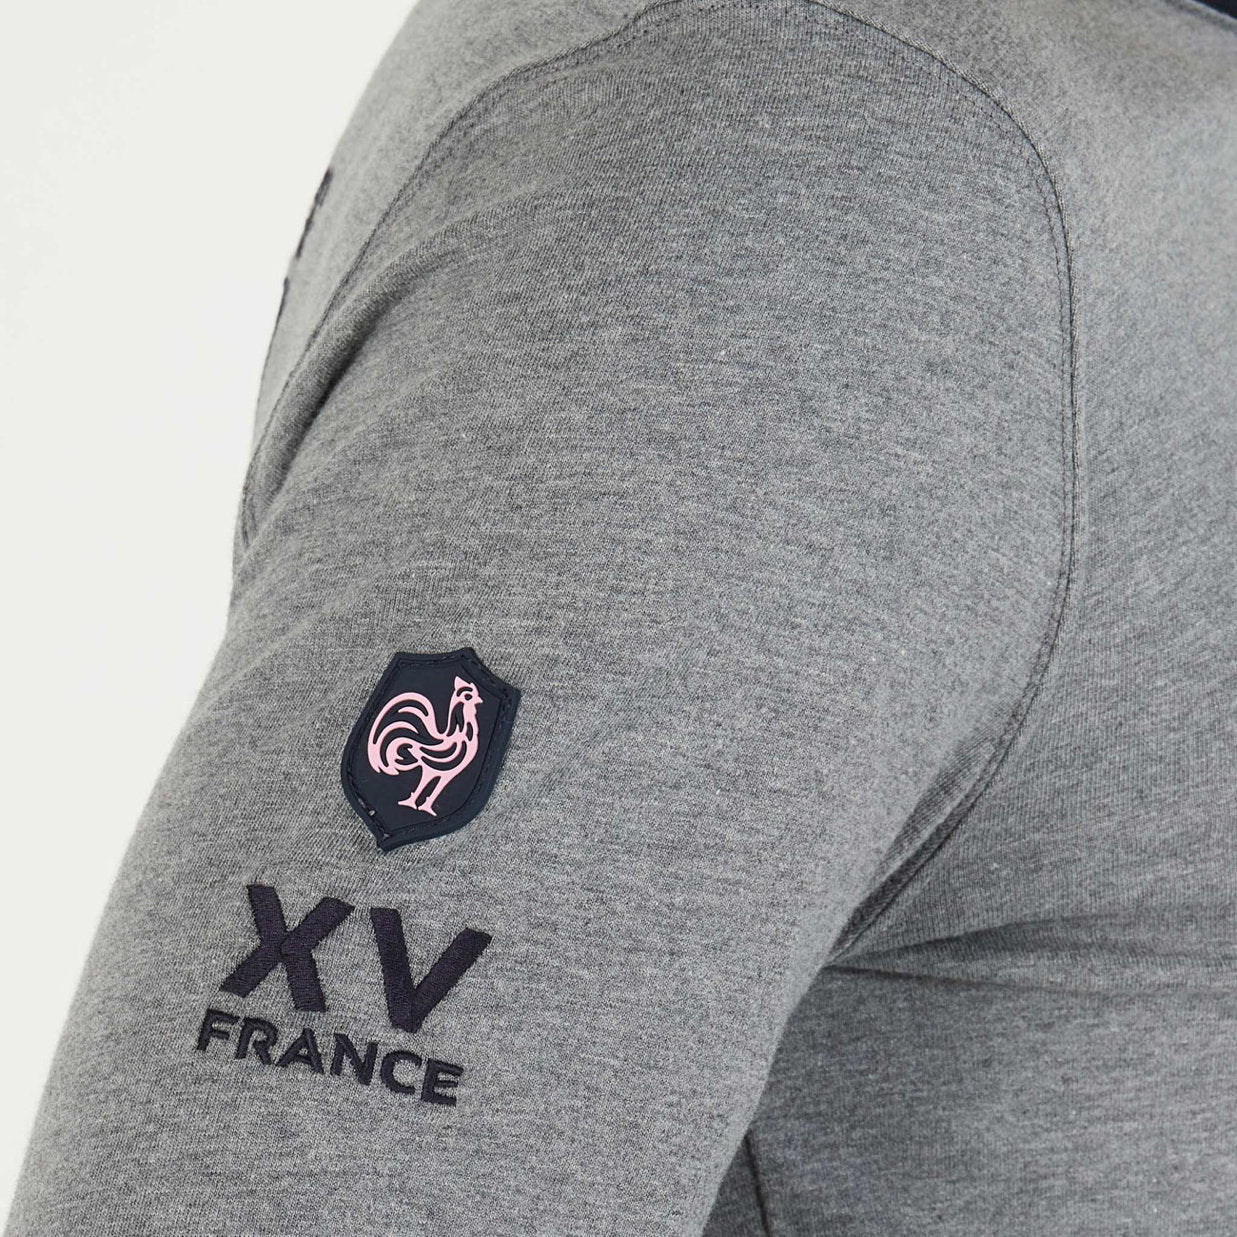 Grey Long-Sleeved Polo With Xv De France Embroidered Detail_H23MAITL0013_GRM_05